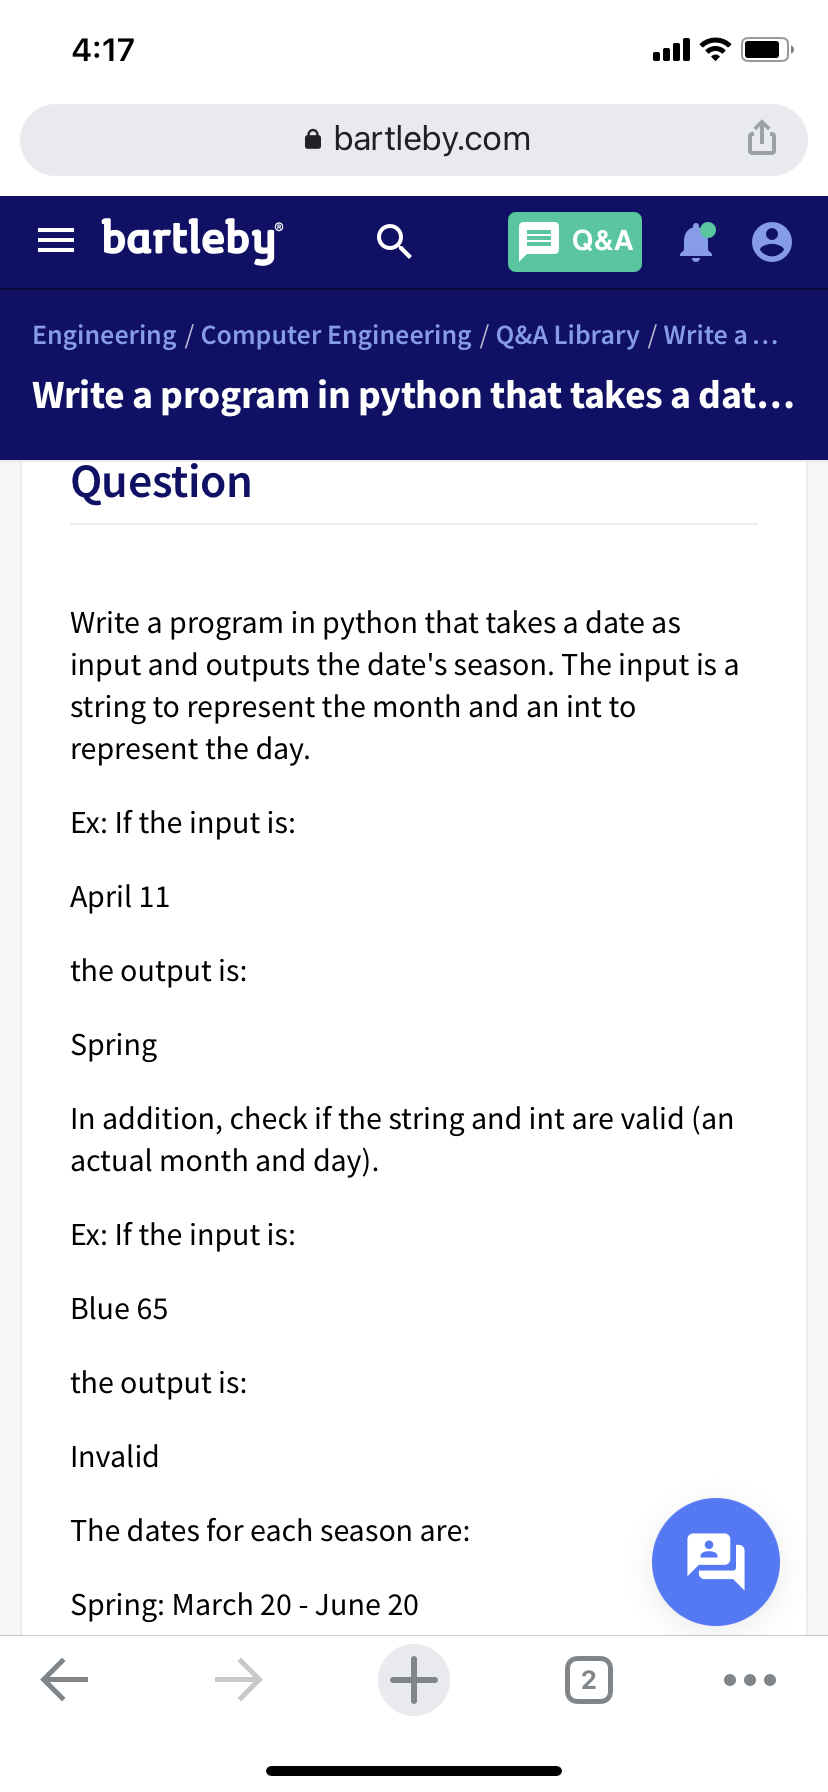 4:17
ull
bartleby.com
bartleby
Q&A
Engineering / Computer Engineering / Q&A Library / Write a ...
Write a program in python that takes a dat...
Question
Write a program in python that takes a date as
input and outputs the date's season. The input is a
string to represent the month and an int to
represent the day.
Ex: If the input is:
April 11
the output is:
Spring
In addition, check if the string and int are valid (an
actual month and day).
Ex: If the input is:
Blue 65
the output is:
Invalid
The dates for each season are:
Spring: March 20 - June 20
